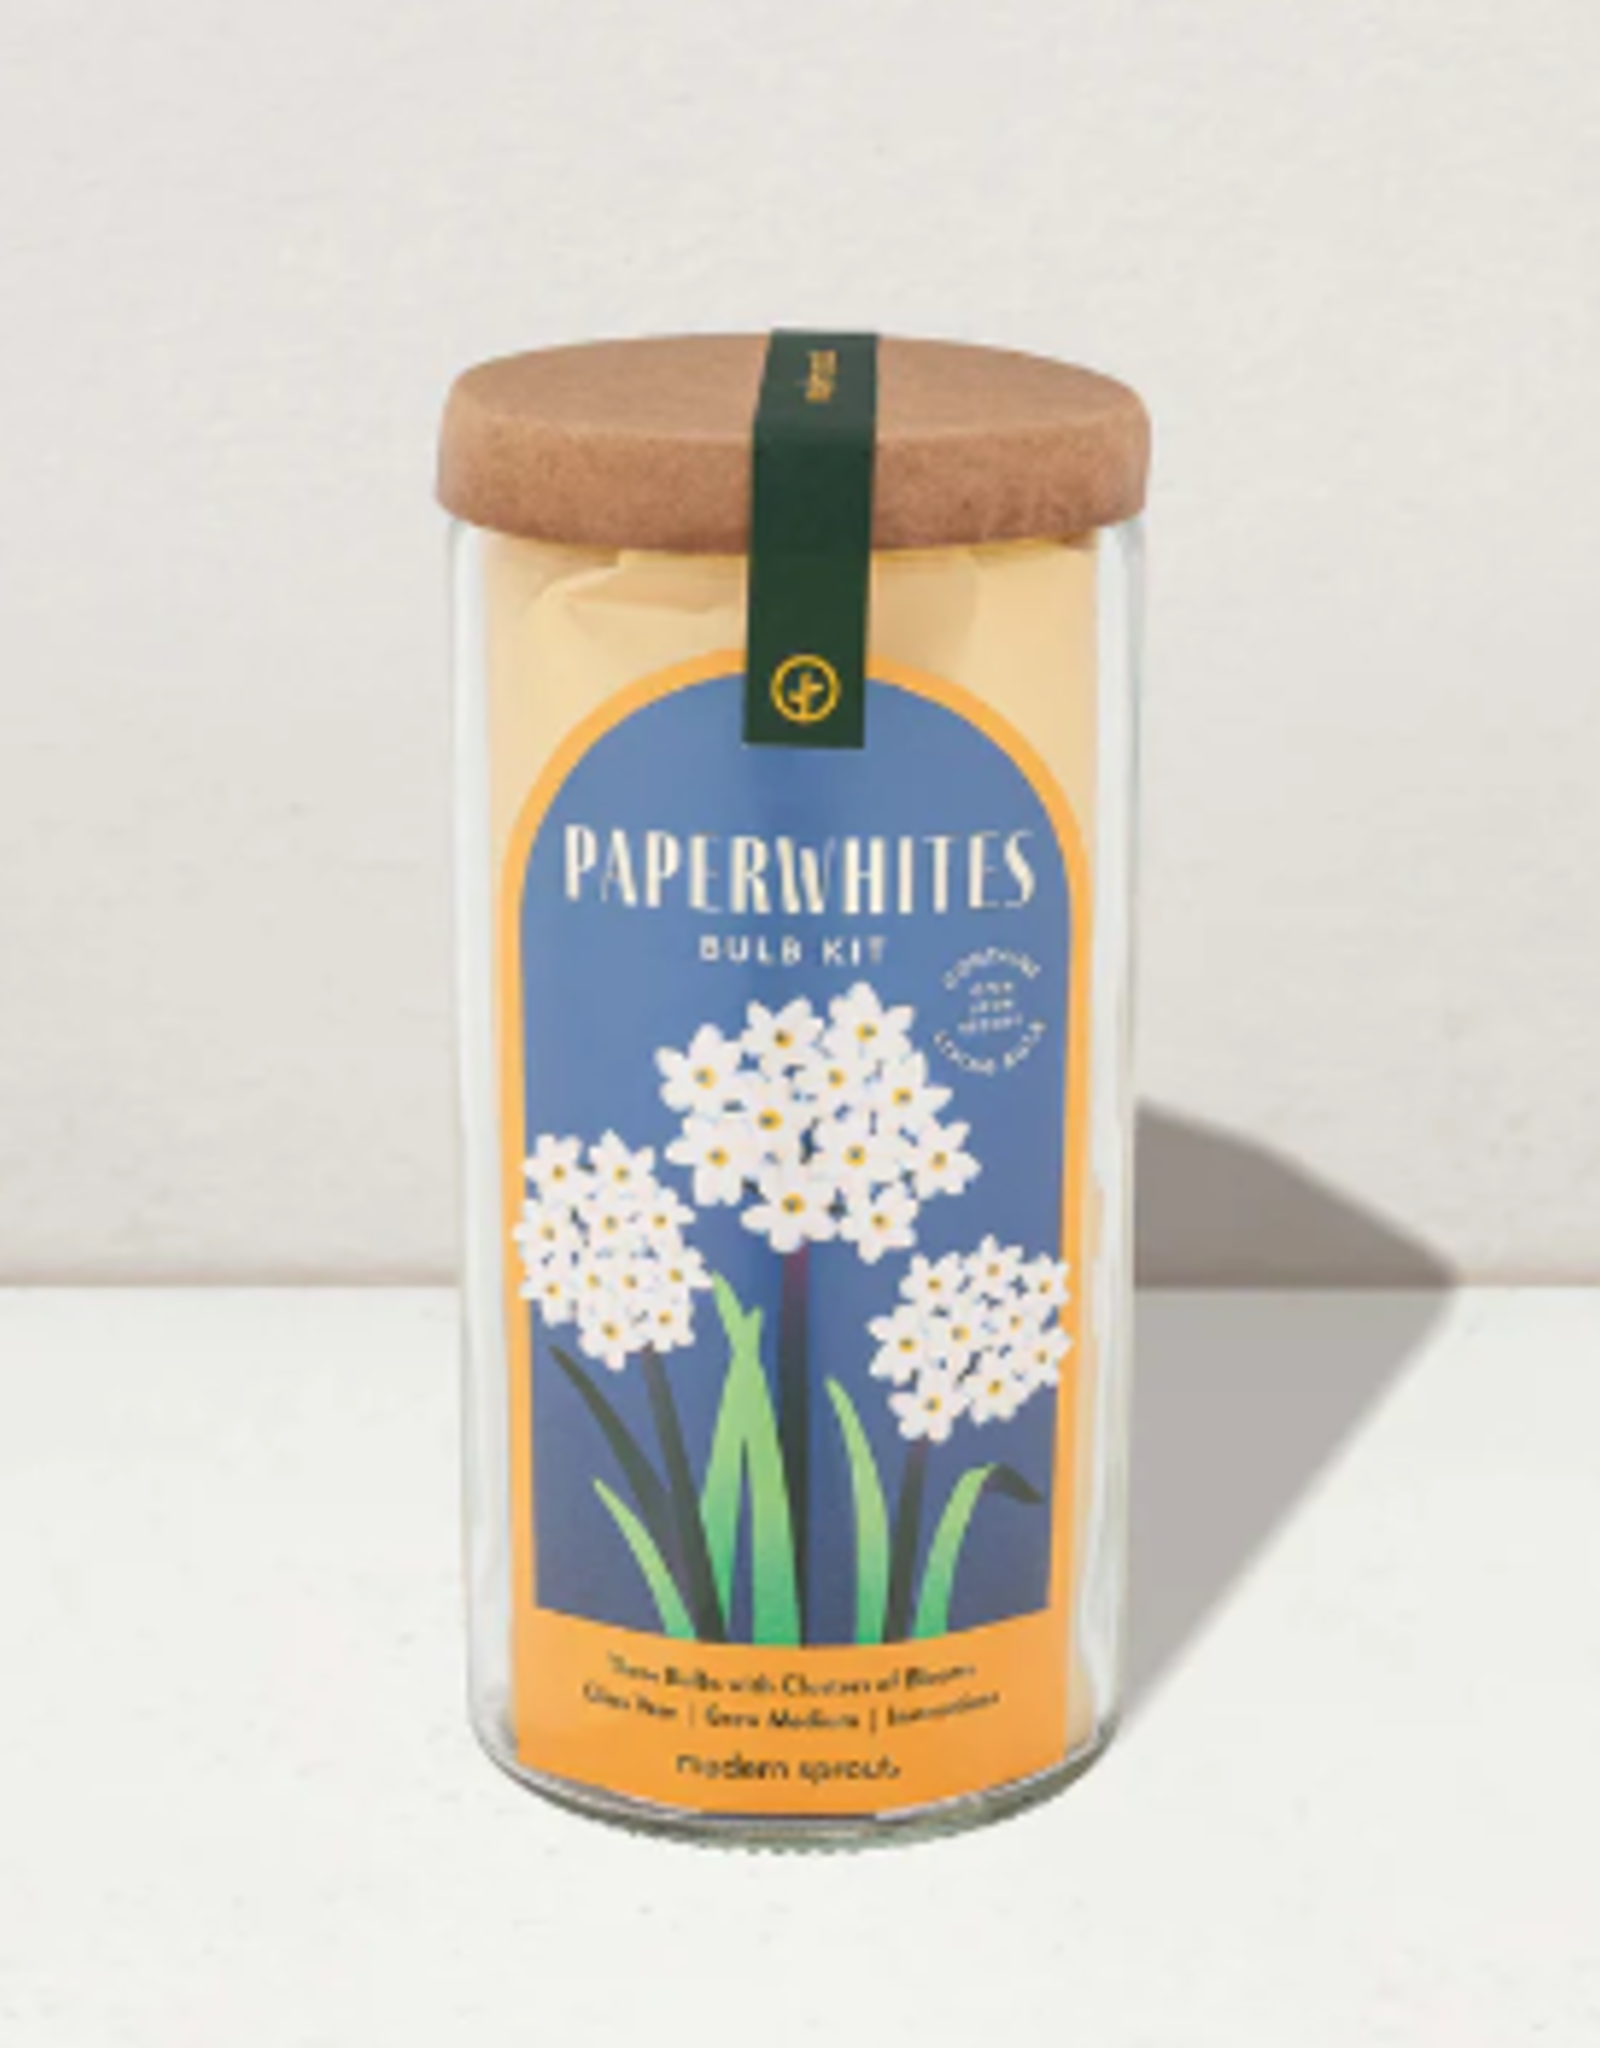 Modern Sprout Winter Bulb Kit - Paperwhites